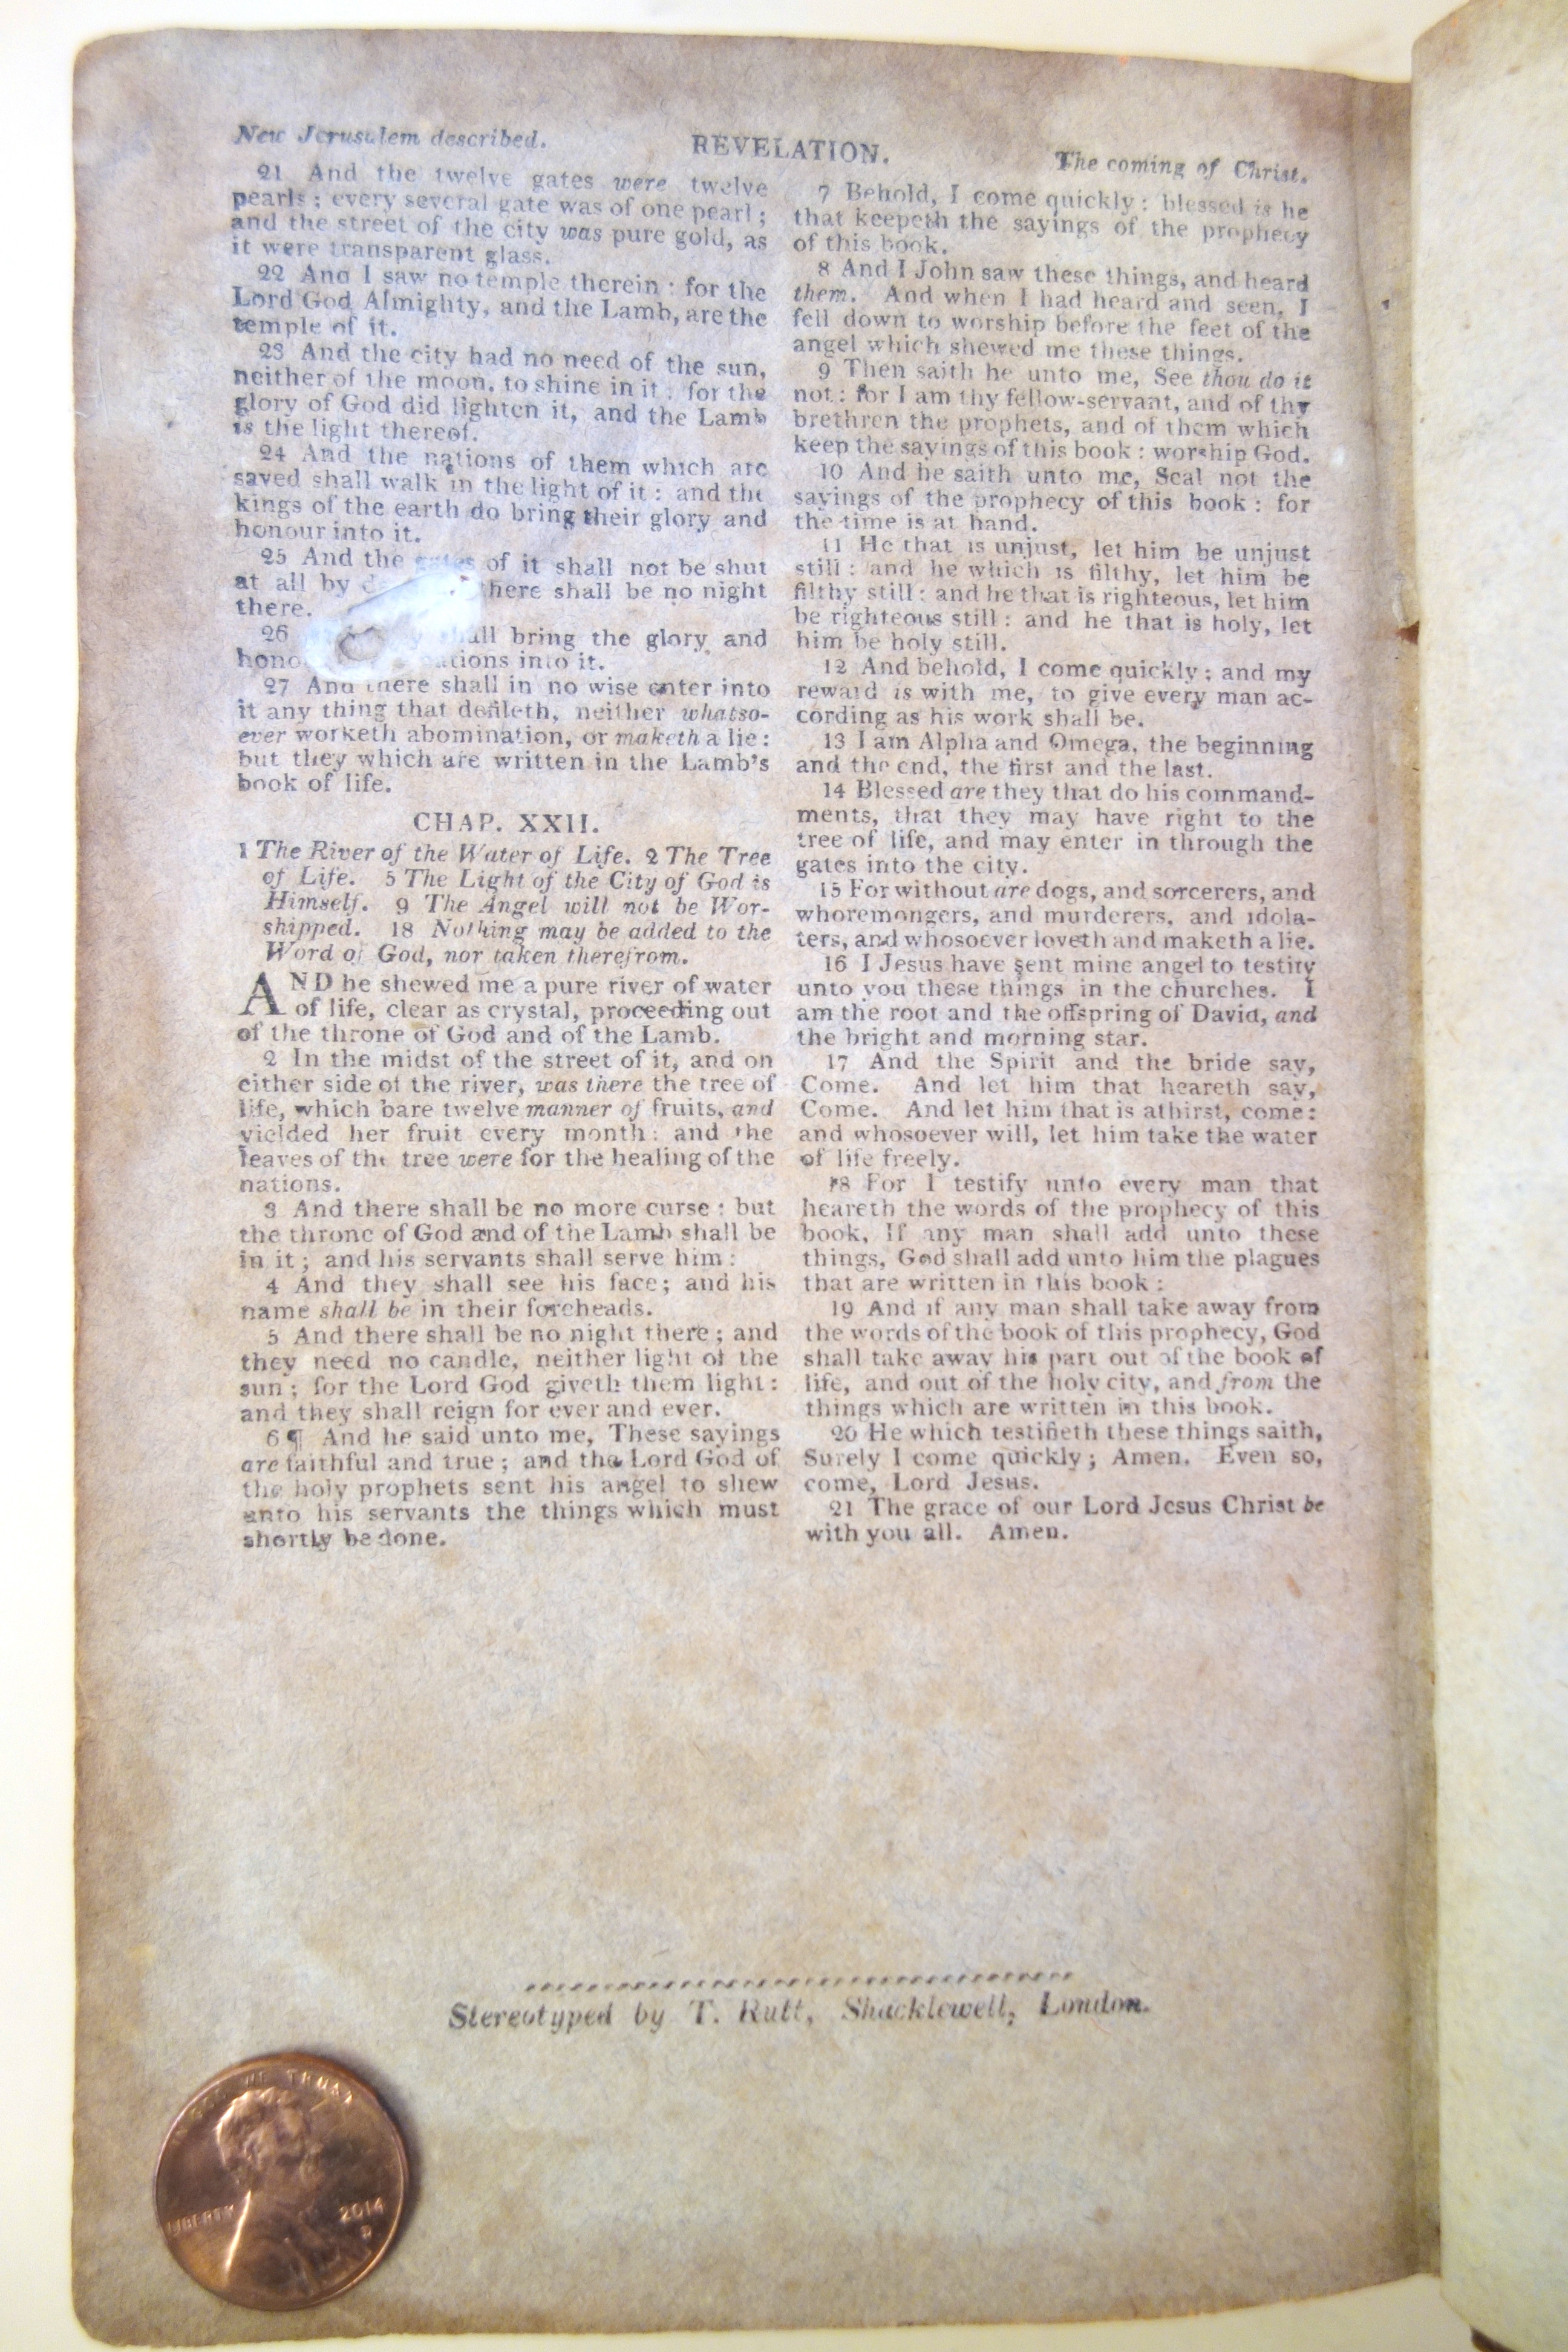 1st stereotyped Bible last page